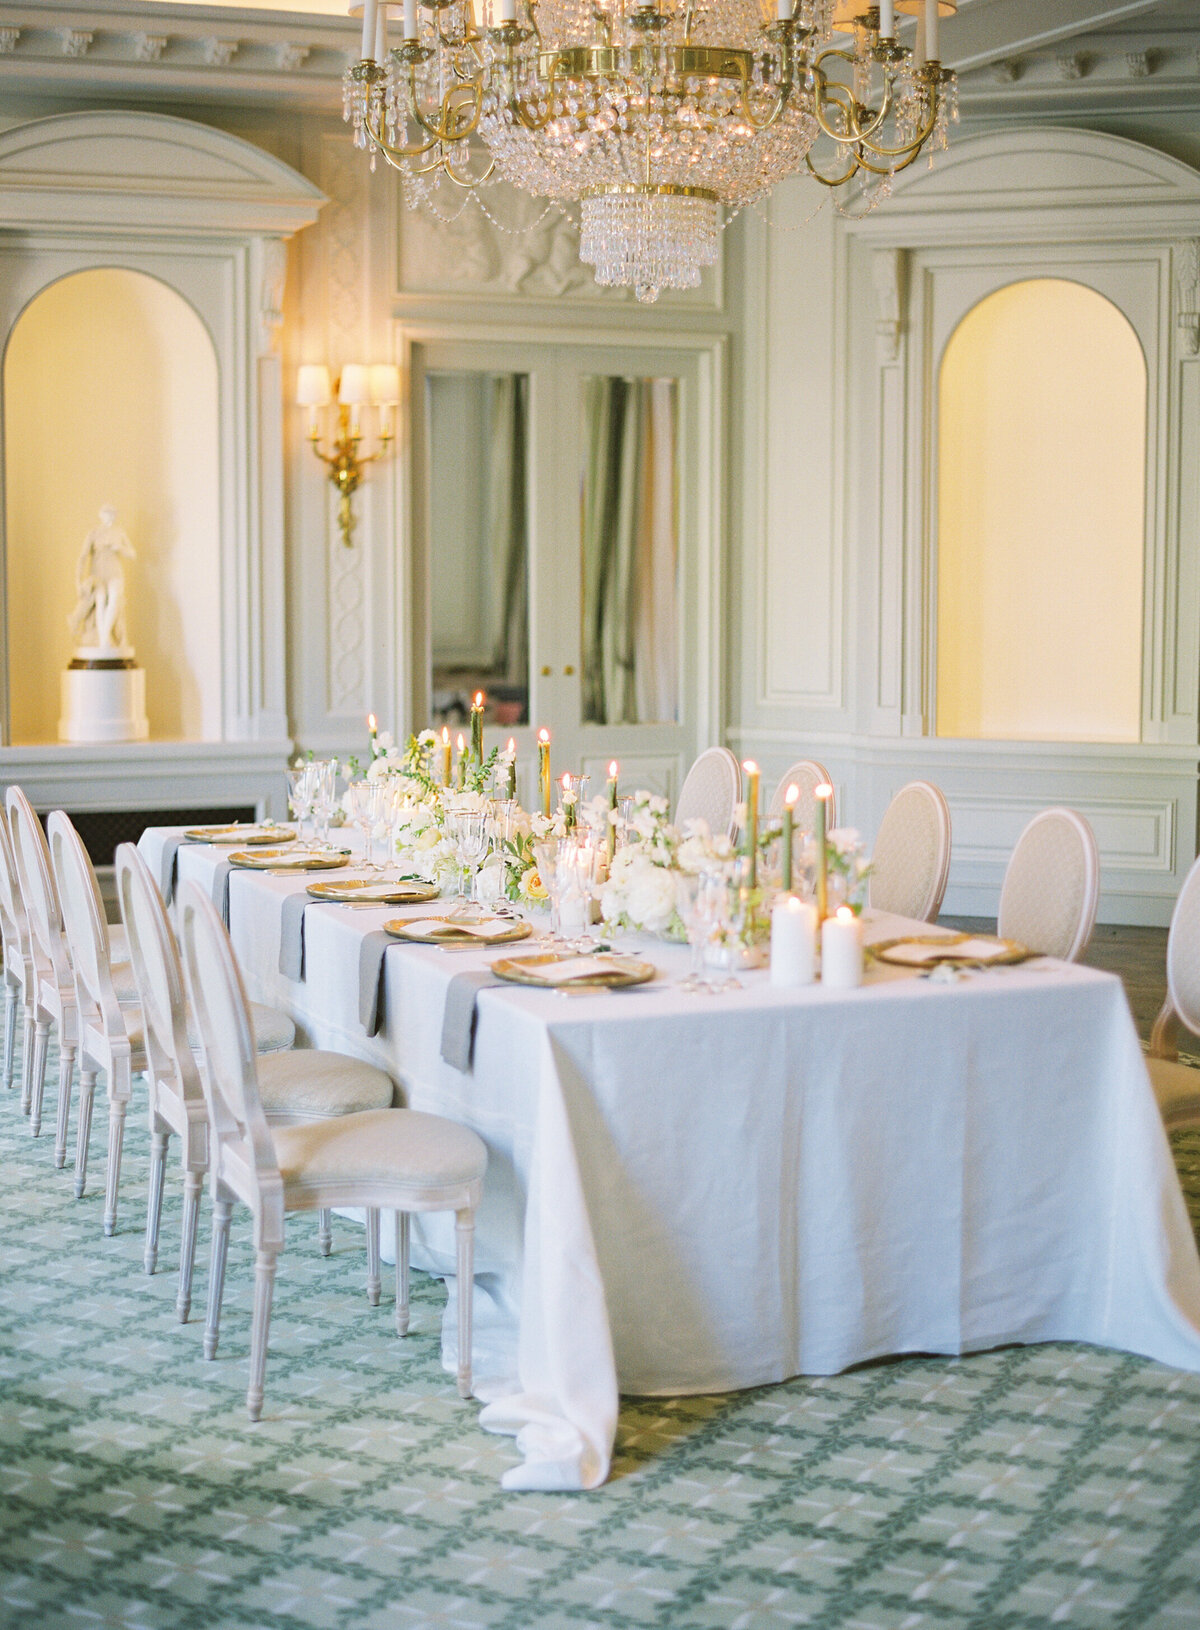 Wedding Decor Photographed in Paris, France, by Wedding Photographers Pinnel Photography.